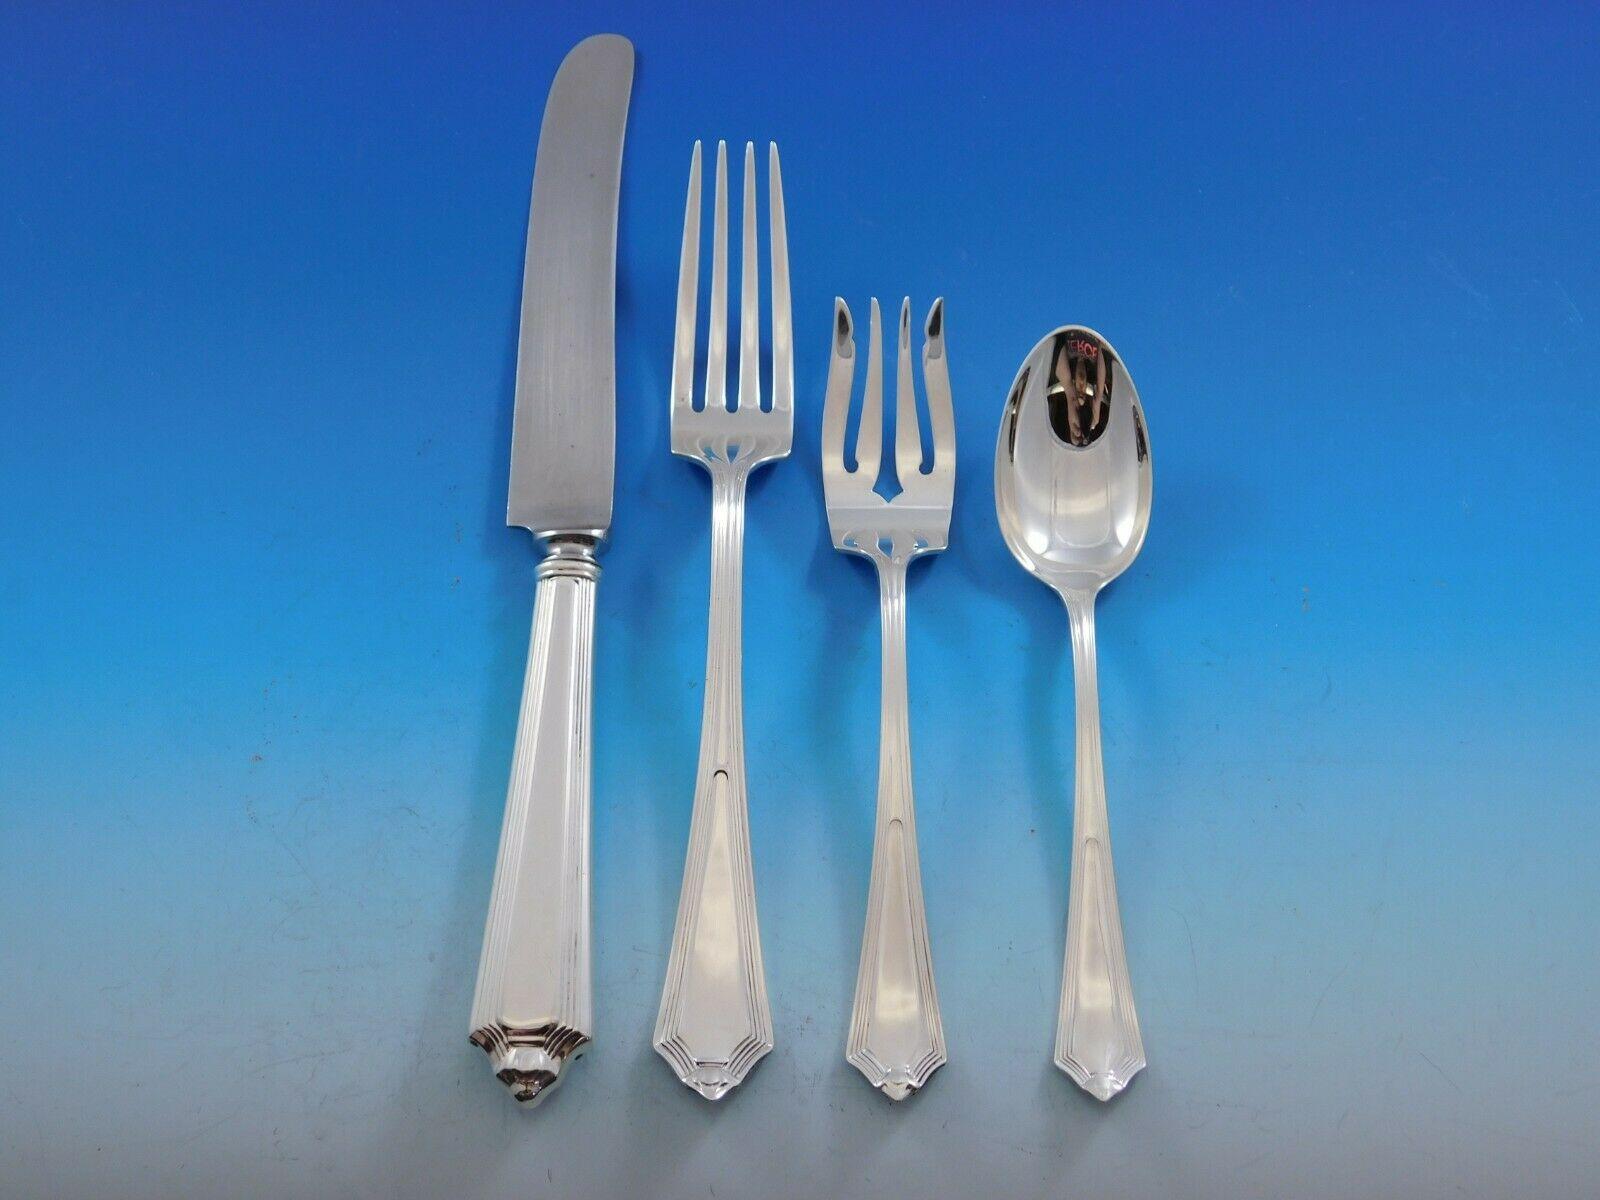 Dinner size Plymouth by Gorham sterling silver flatware set, 87 pieces. This set includes:

12 dinner size knives, French blade, 9 5/8